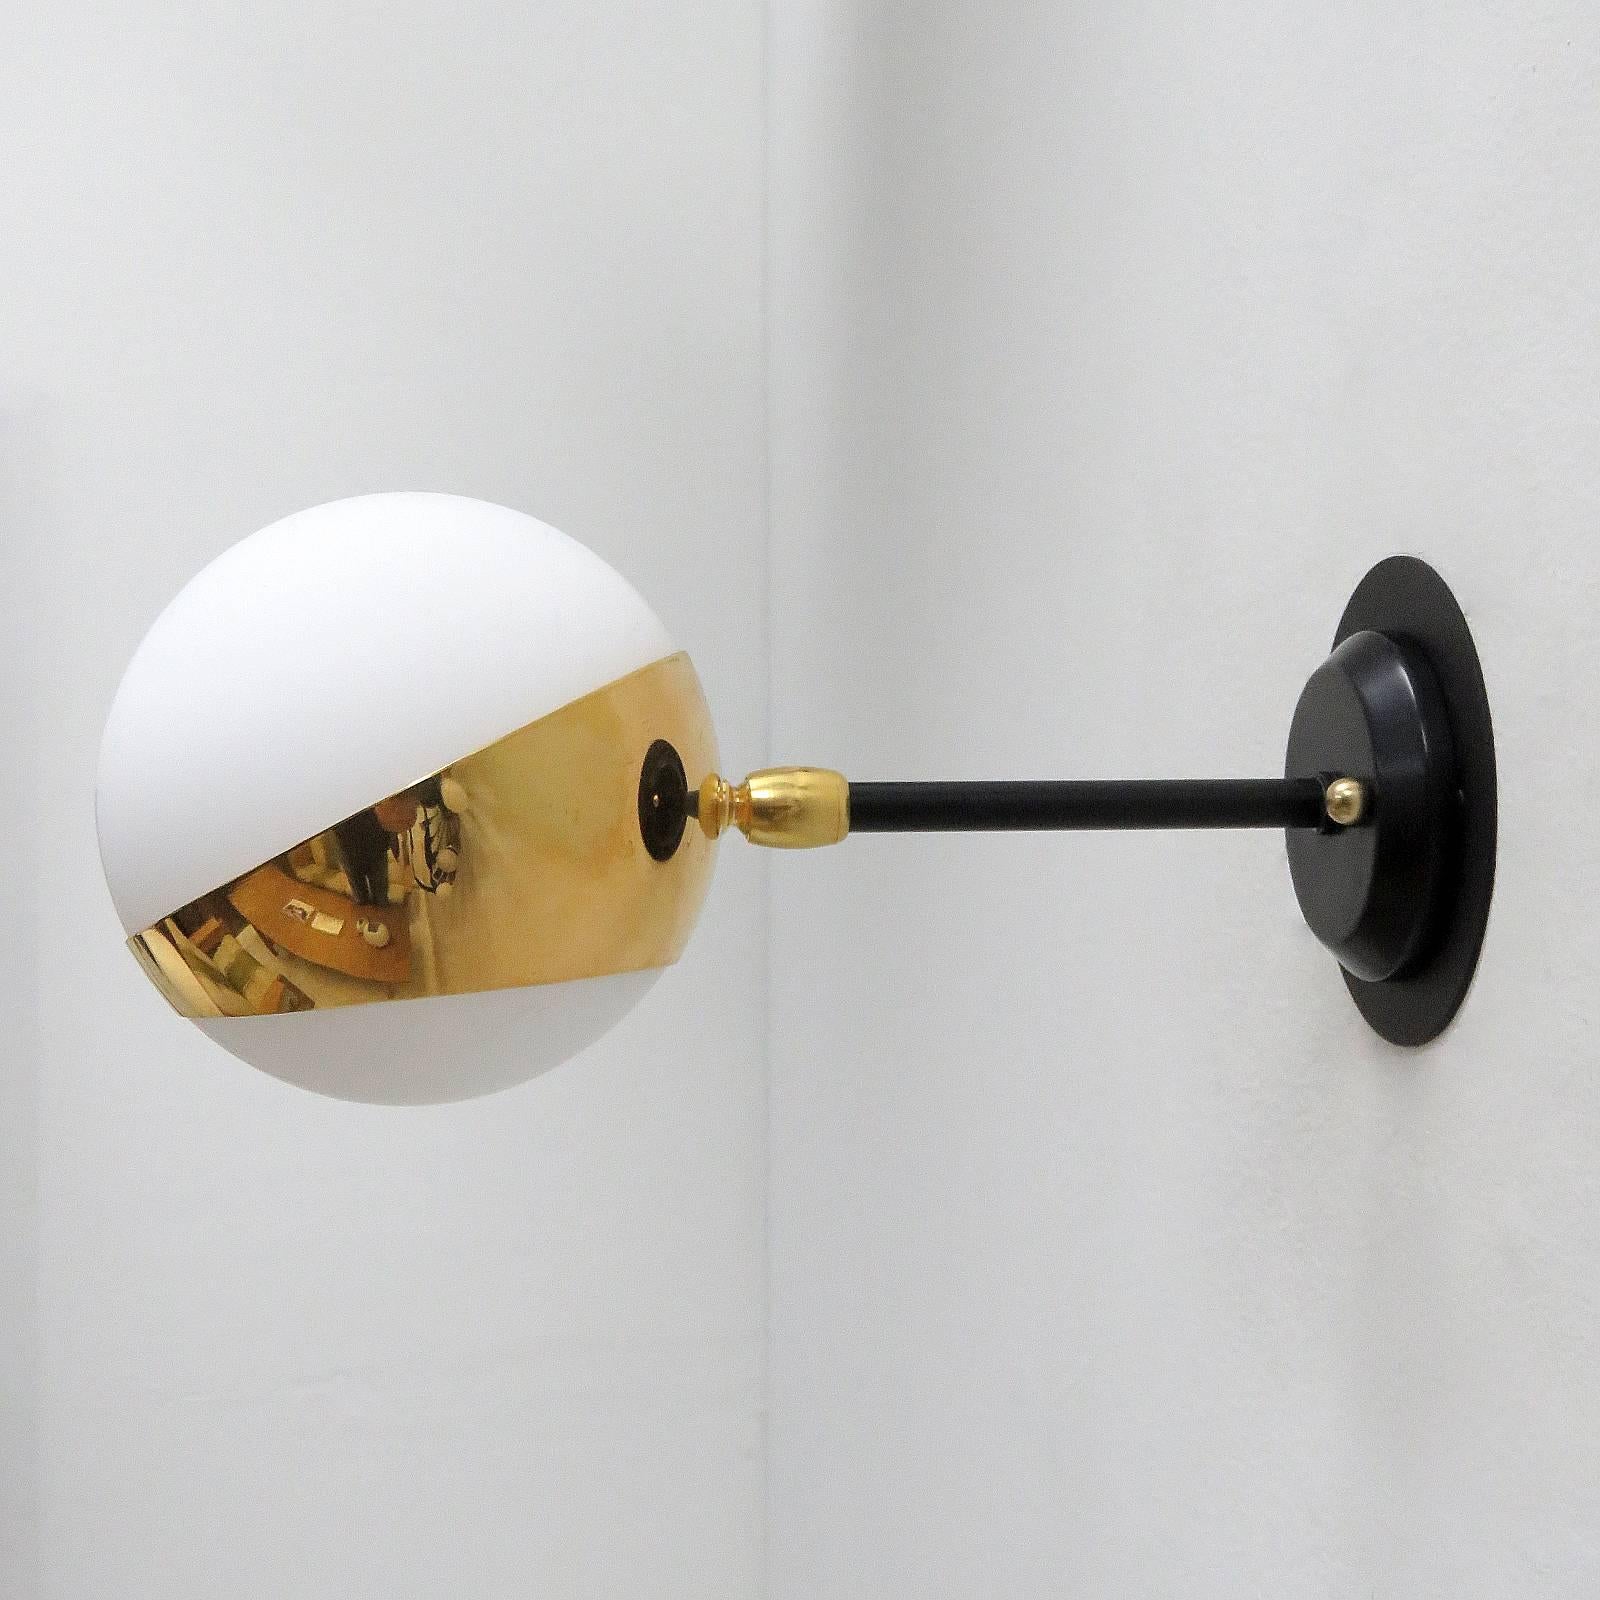 Wonderful pair of Italian wall lights manufactured by Stilnovo, 1950s, with an opaline glass sphere in a partially spherical brass holder on a swivel jointed black enameled arm.